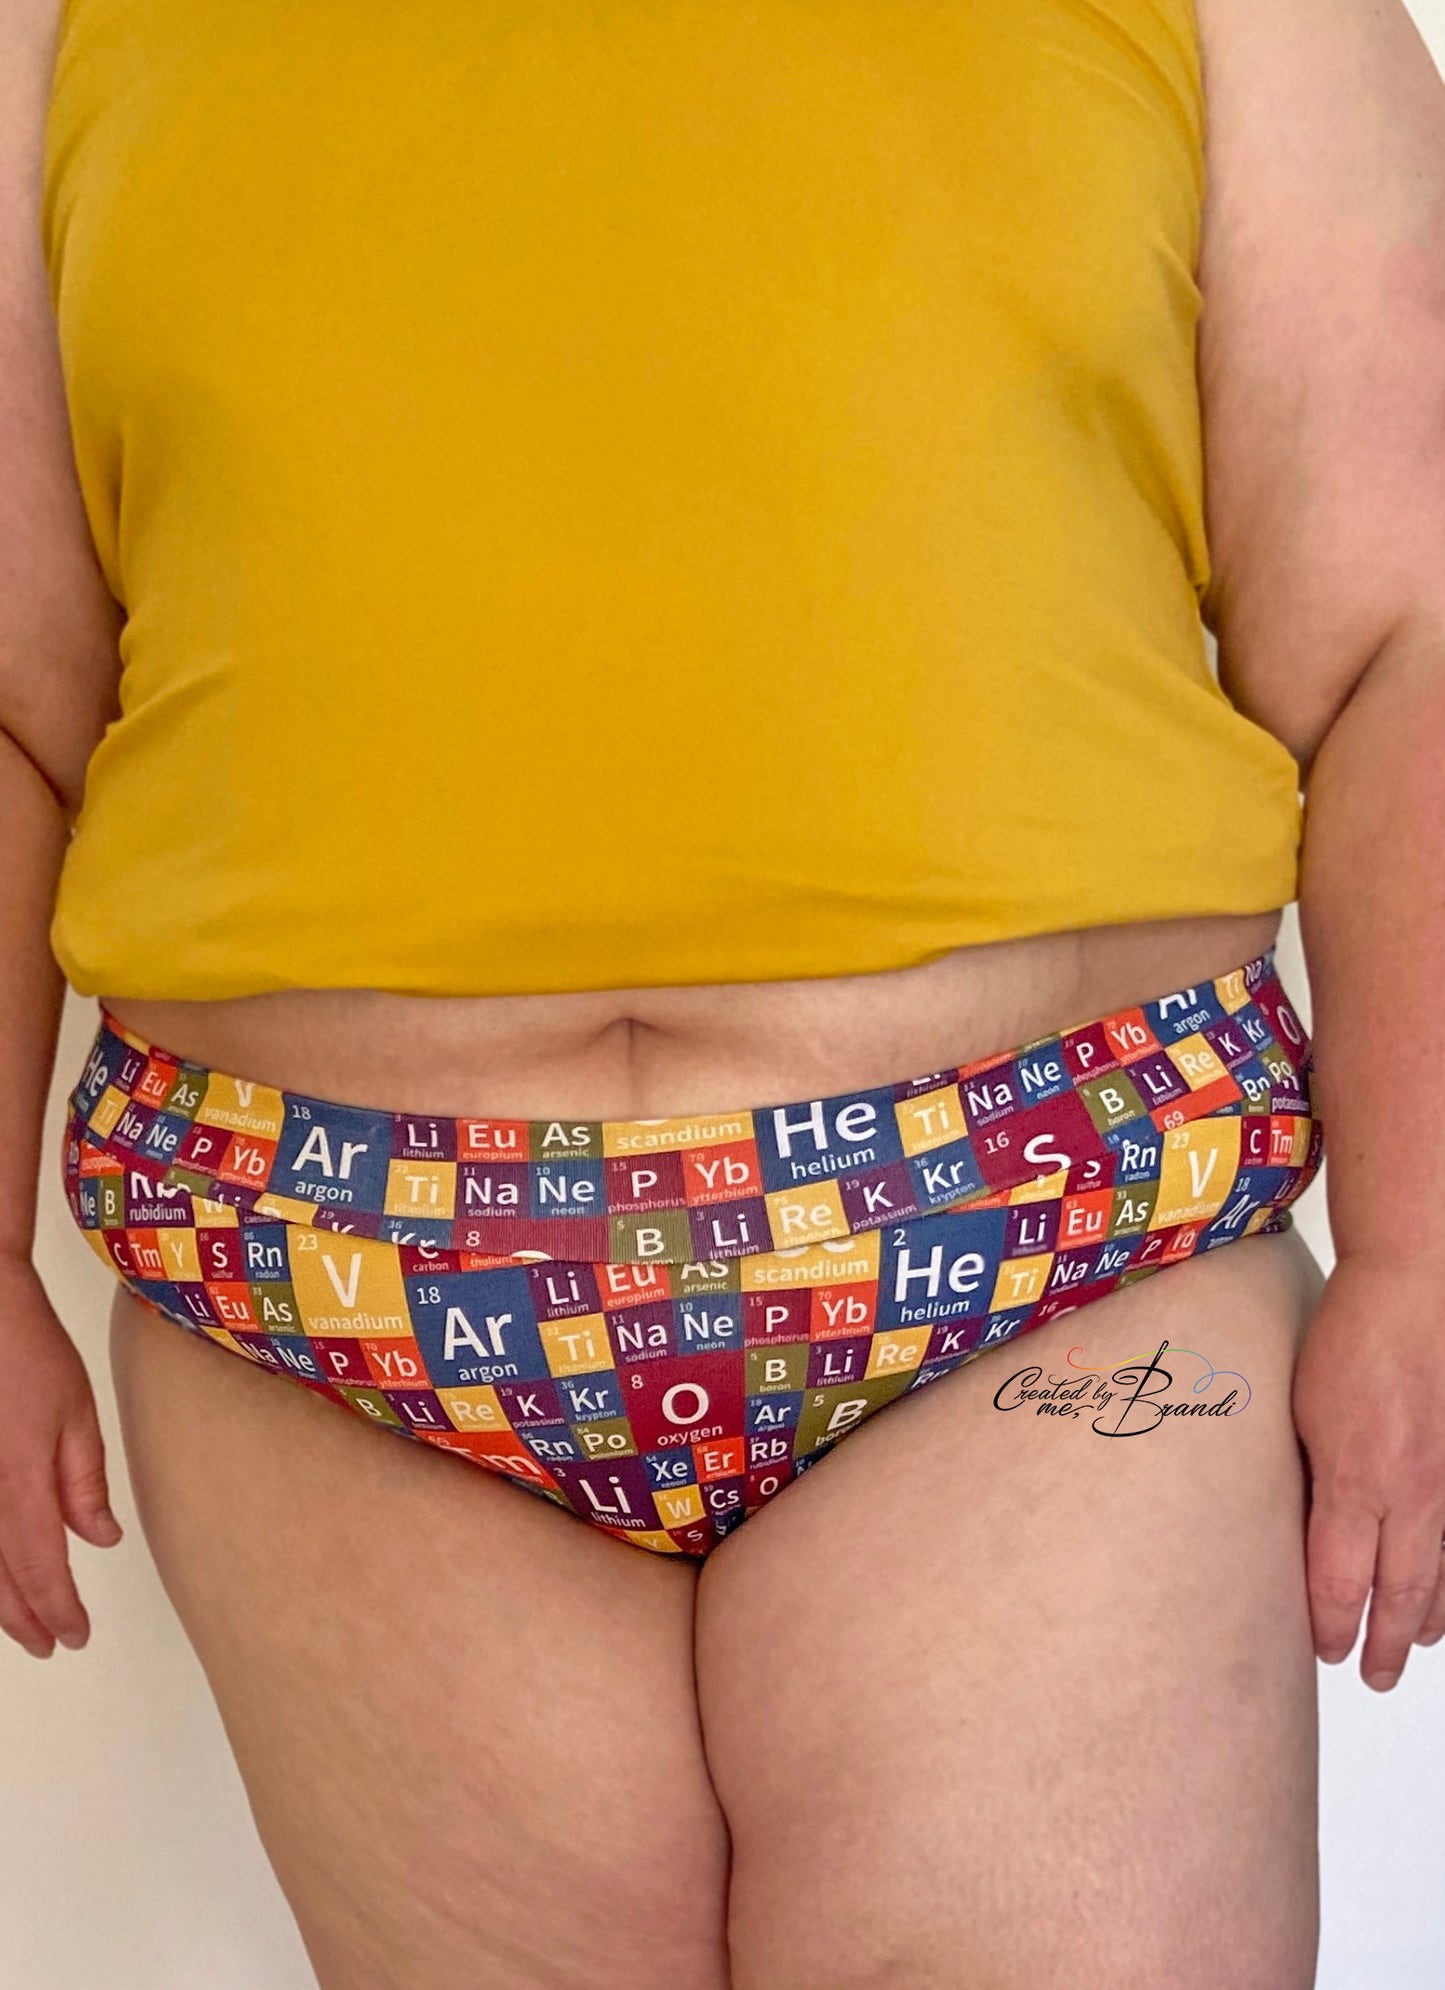 Adult Booty Bottoms - PDF - DIGITAL Pattern File Download for Sewing Cheeky Underwear